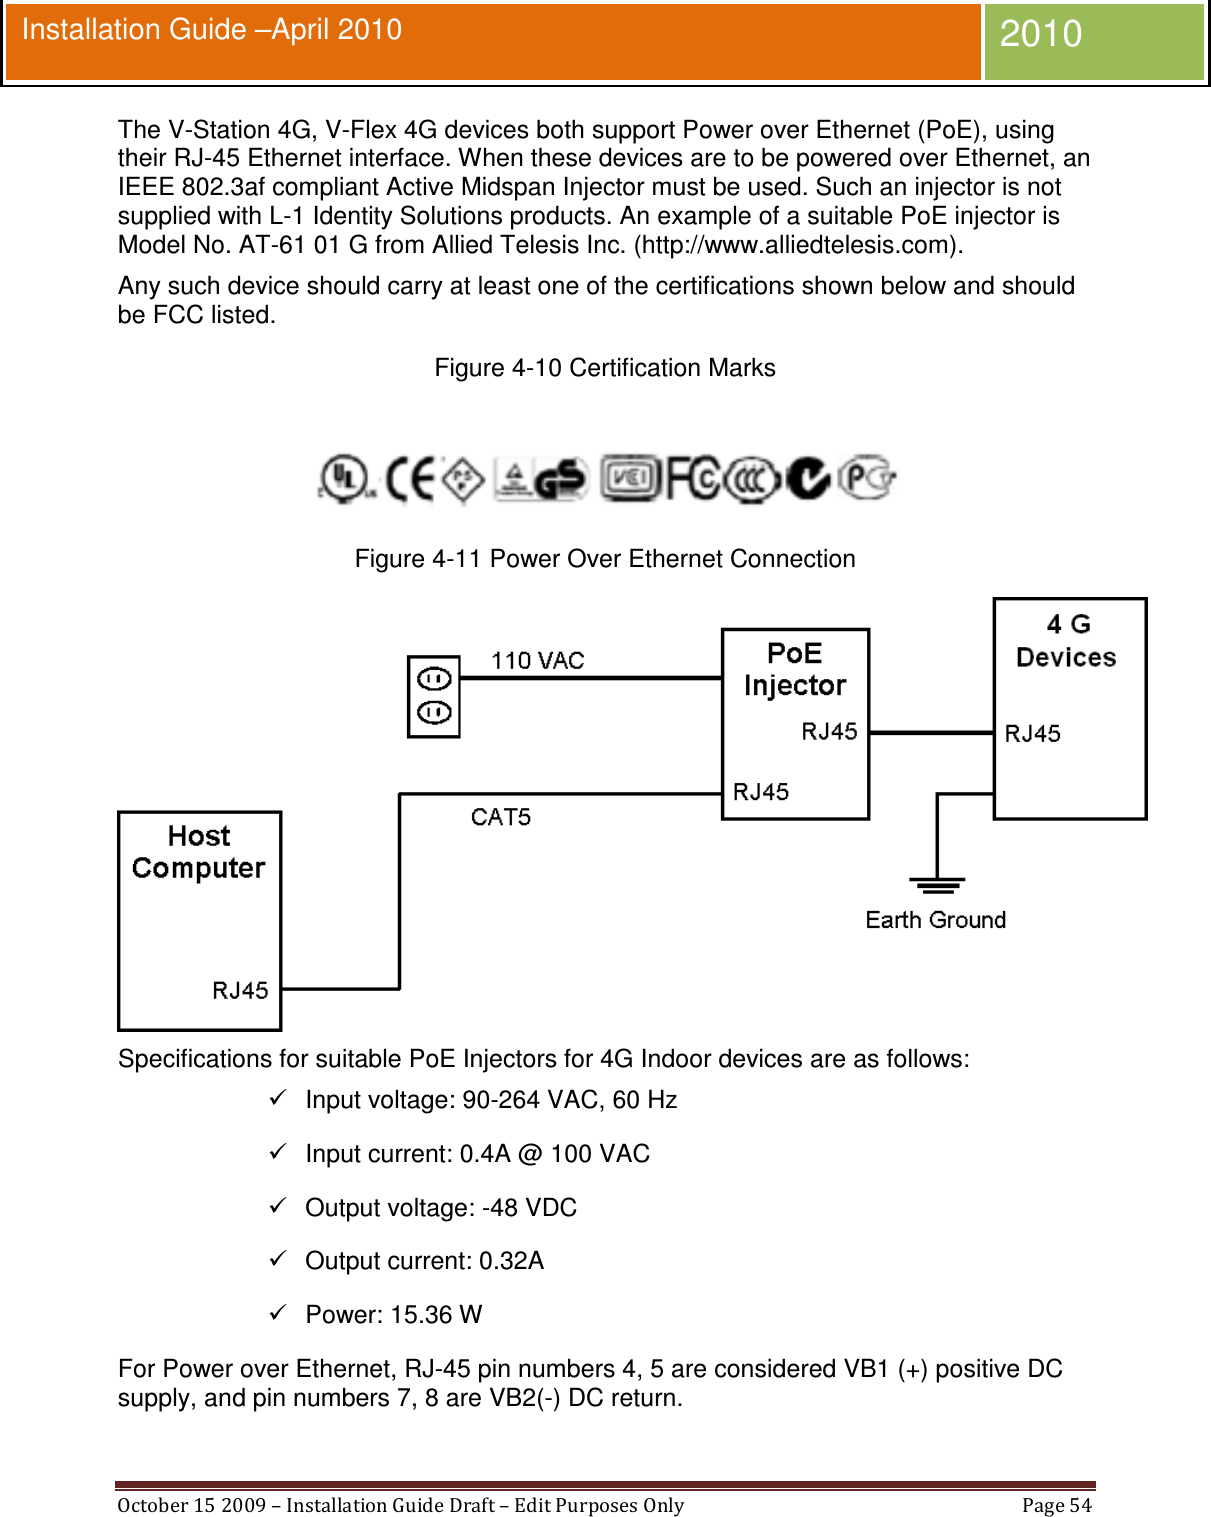  October 15 2009 – Installation Guide Draft – Edit Purposes Only  Page 54  Installation Guide –April 2010 2010 The V-Station 4G, V-Flex 4G devices both support Power over Ethernet (PoE), using their RJ-45 Ethernet interface. When these devices are to be powered over Ethernet, an IEEE 802.3af compliant Active Midspan Injector must be used. Such an injector is not supplied with L-1 Identity Solutions products. An example of a suitable PoE injector is Model No. AT-61 01 G from Allied Telesis Inc. (http://www.alliedtelesis.com). Any such device should carry at least one of the certifications shown below and should be FCC listed. Figure 4-10 Certification Marks   Figure 4-11 Power Over Ethernet Connection  Specifications for suitable PoE Injectors for 4G Indoor devices are as follows:   Input voltage: 90-264 VAC, 60 Hz    Input current: 0.4A @ 100 VAC   Output voltage: -48 VDC   Output current: 0.32A   Power: 15.36 W For Power over Ethernet, RJ-45 pin numbers 4, 5 are considered VB1 (+) positive DC supply, and pin numbers 7, 8 are VB2(-) DC return. 